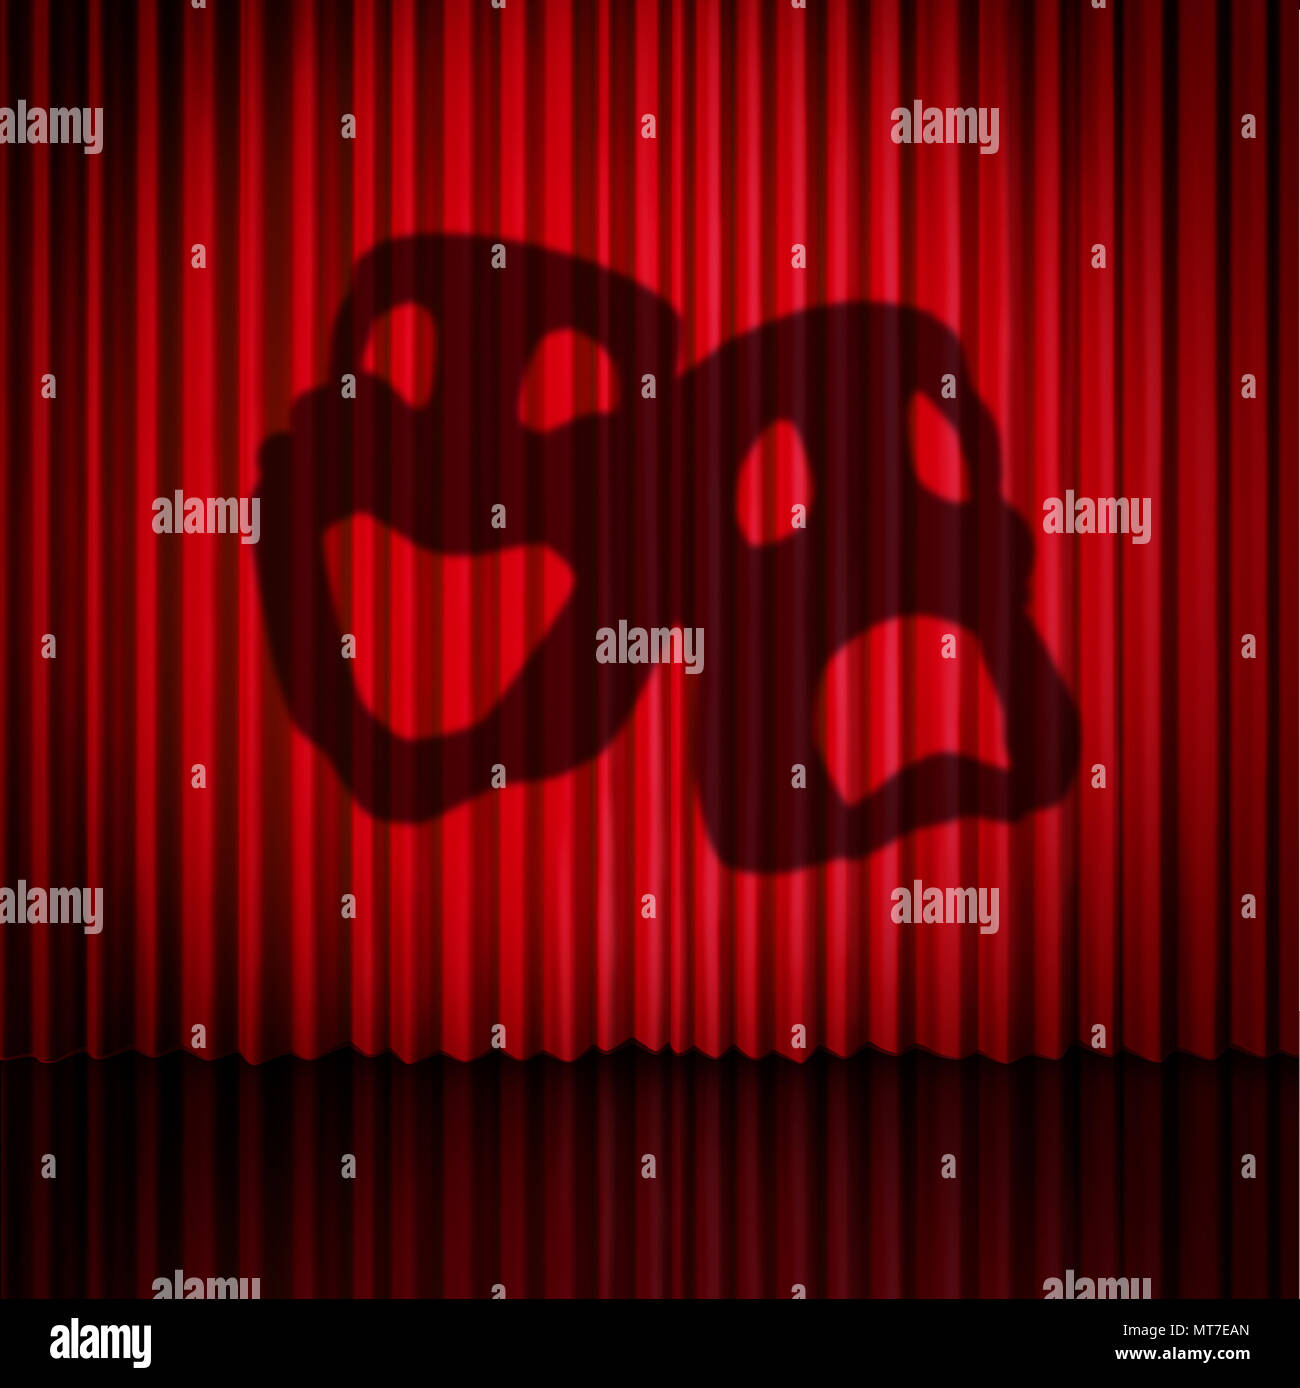 Theatre mask curtains as a drama performance stage concept with comedy and tragedy masks as a 3D illustration. Stock Photo